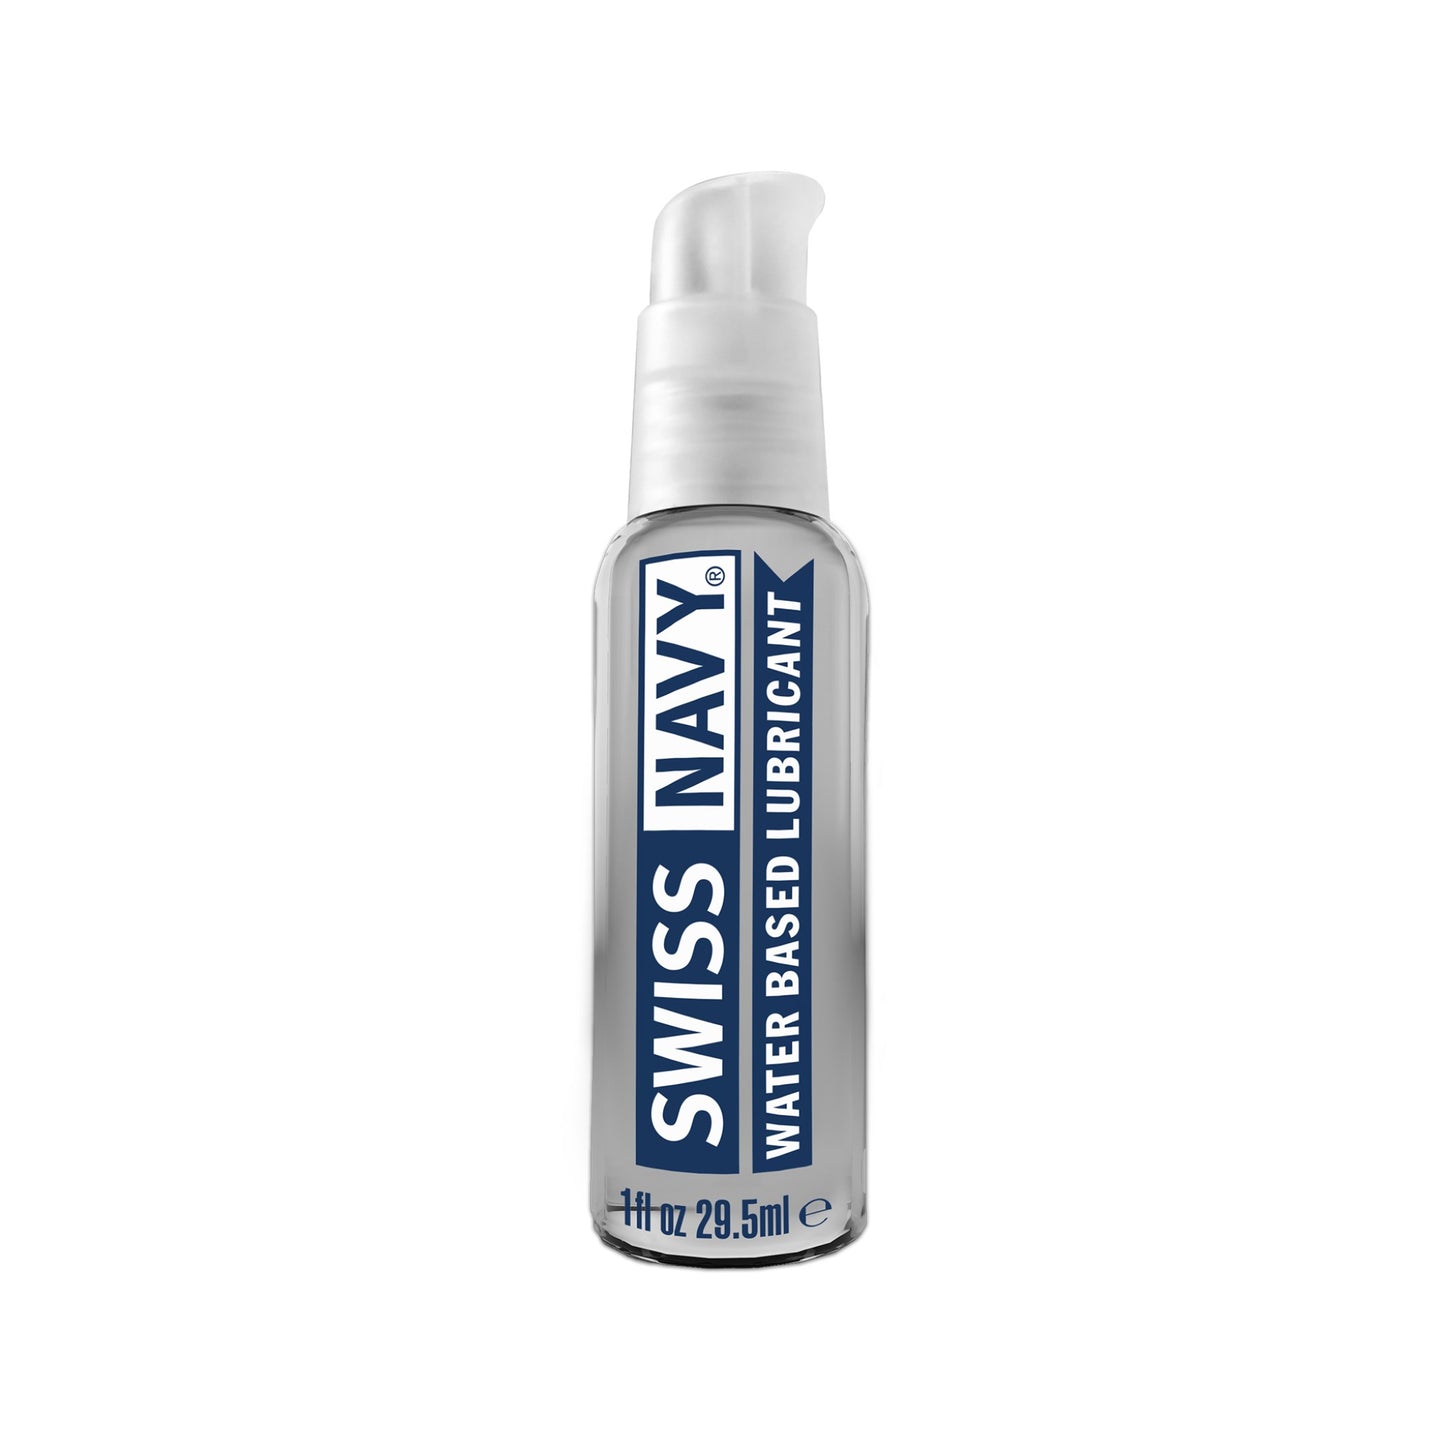 swiss-navy-water-based-lubricant